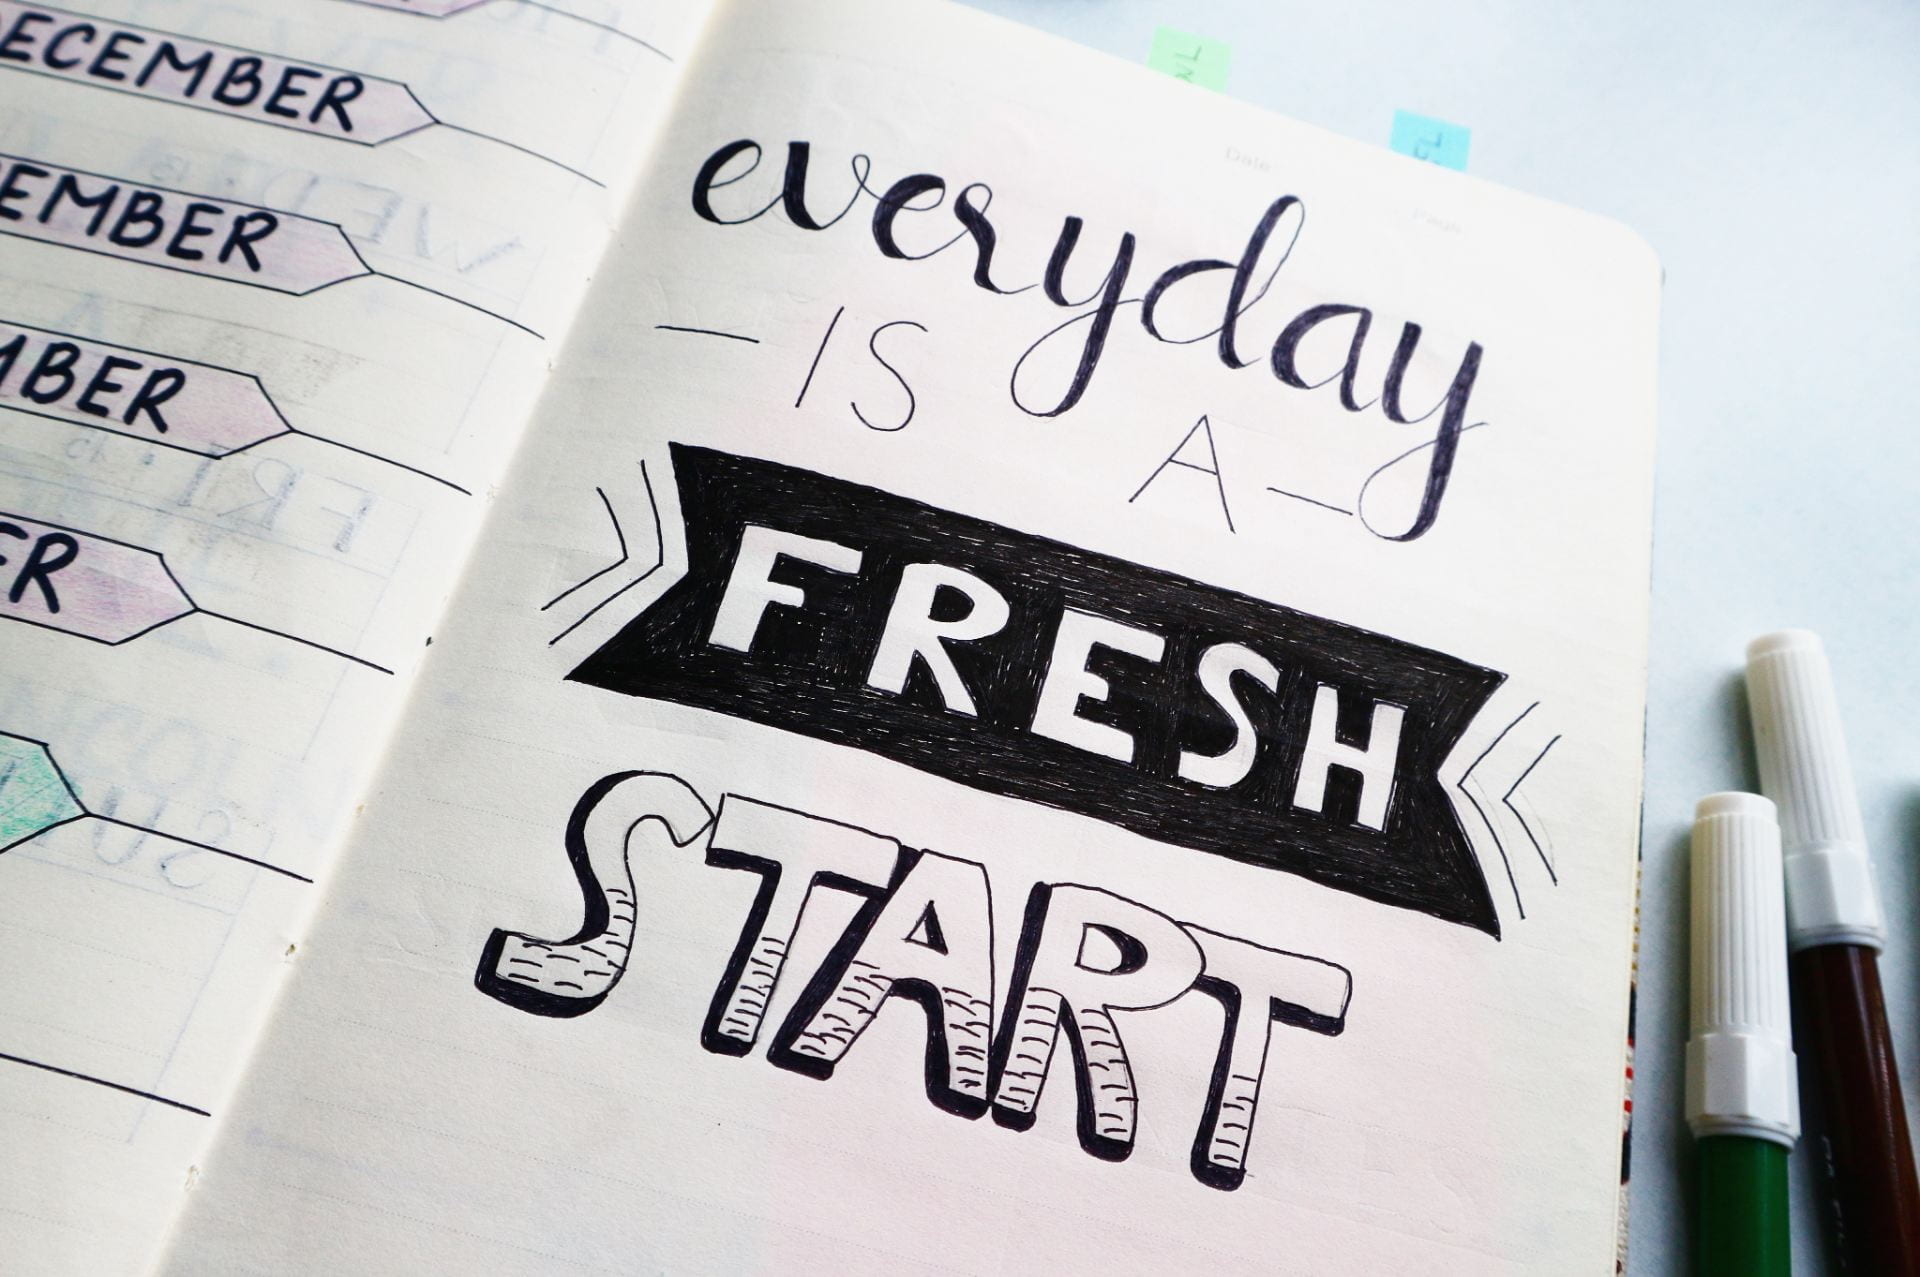 A bullet journal that reads 'Everyday is a fresh start'